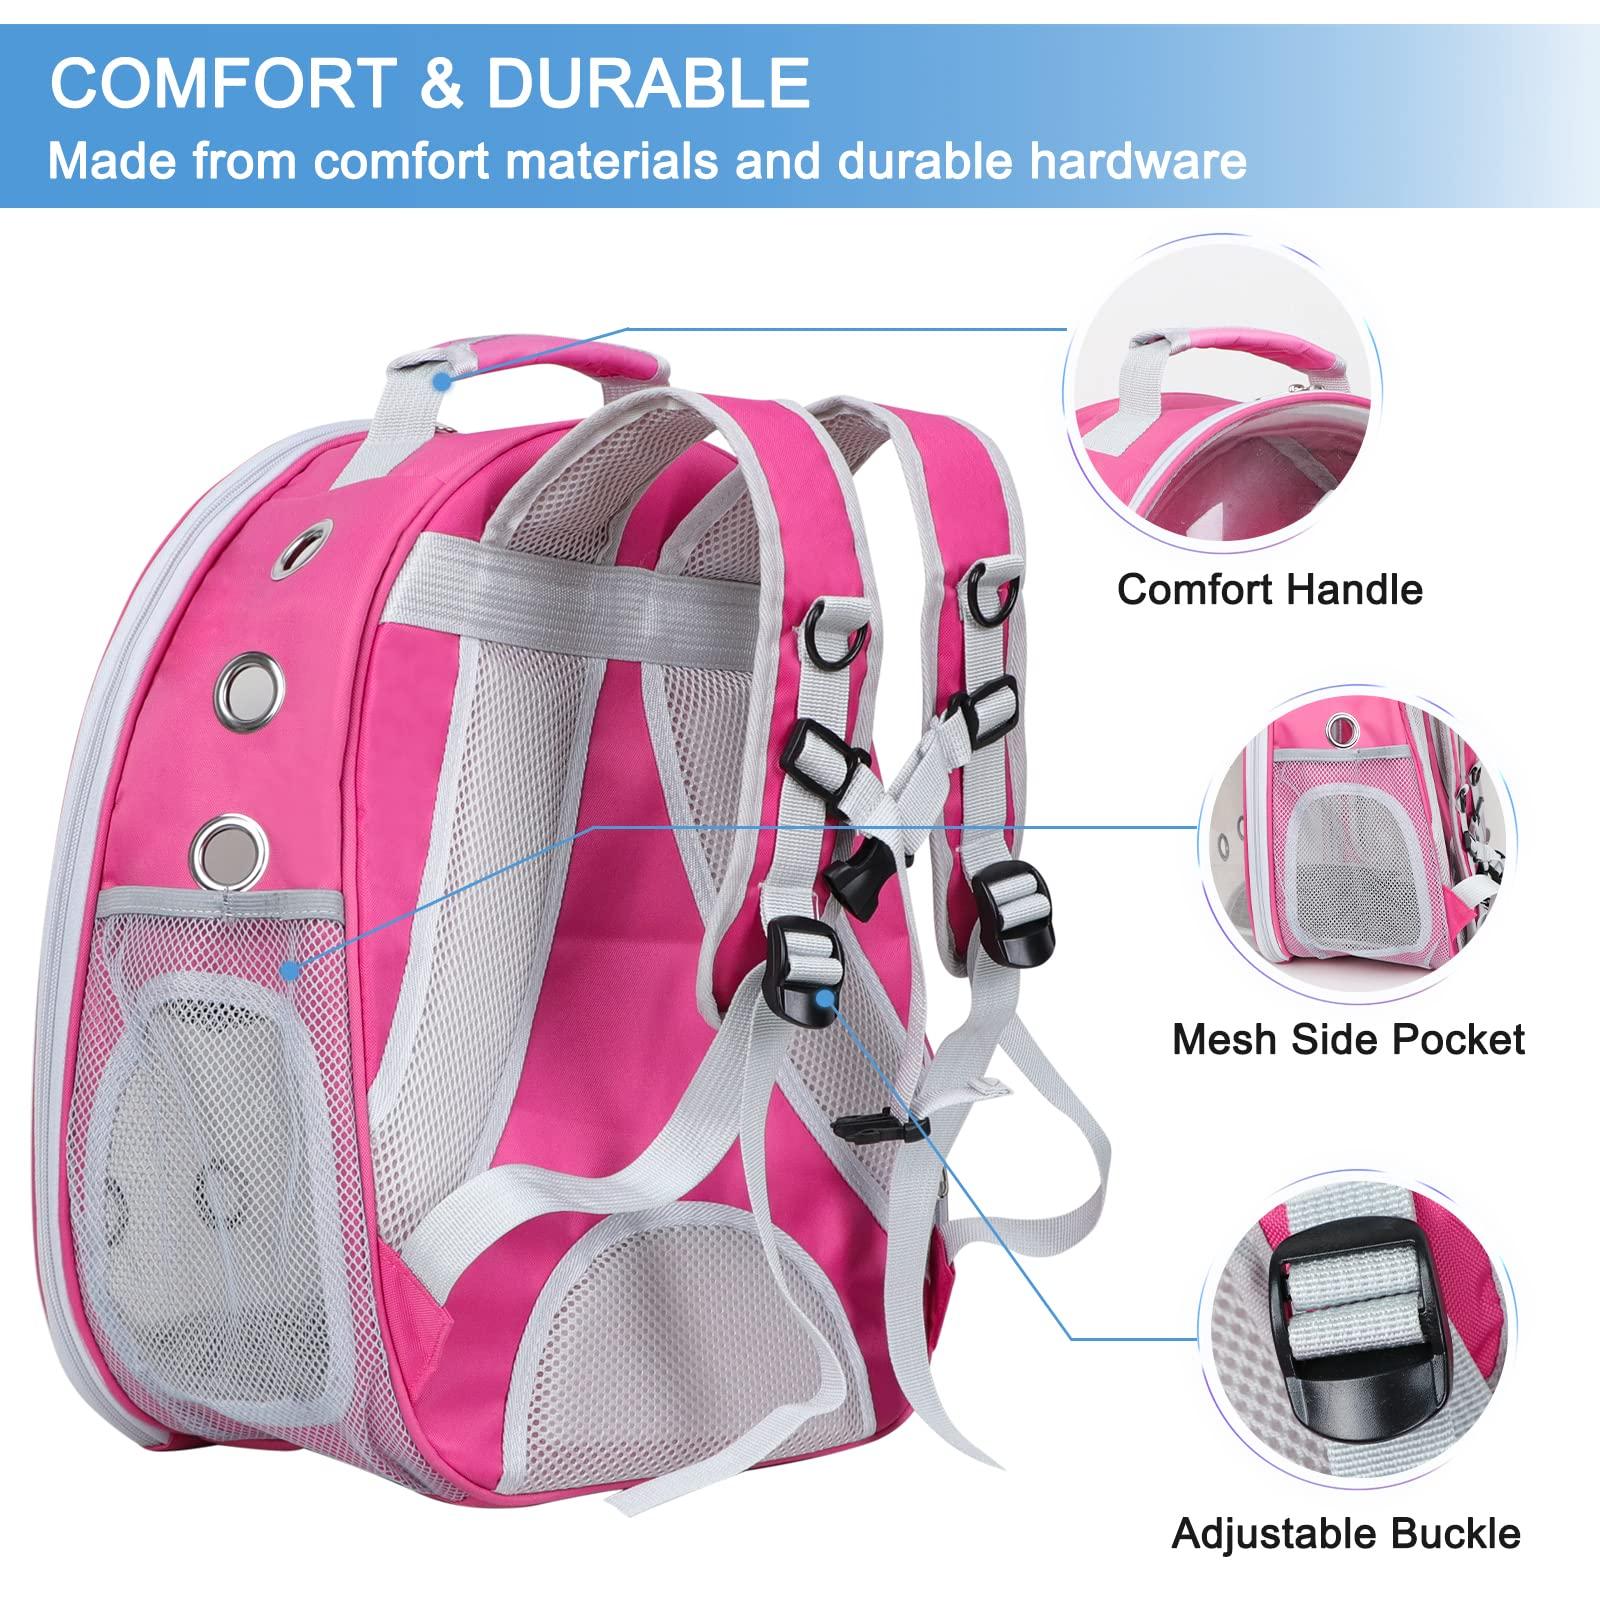 Wholesale Space Capsule Bubble Cat Backpack Carrier, Airline Approved Waterproof Pet Backpack for Small Dog